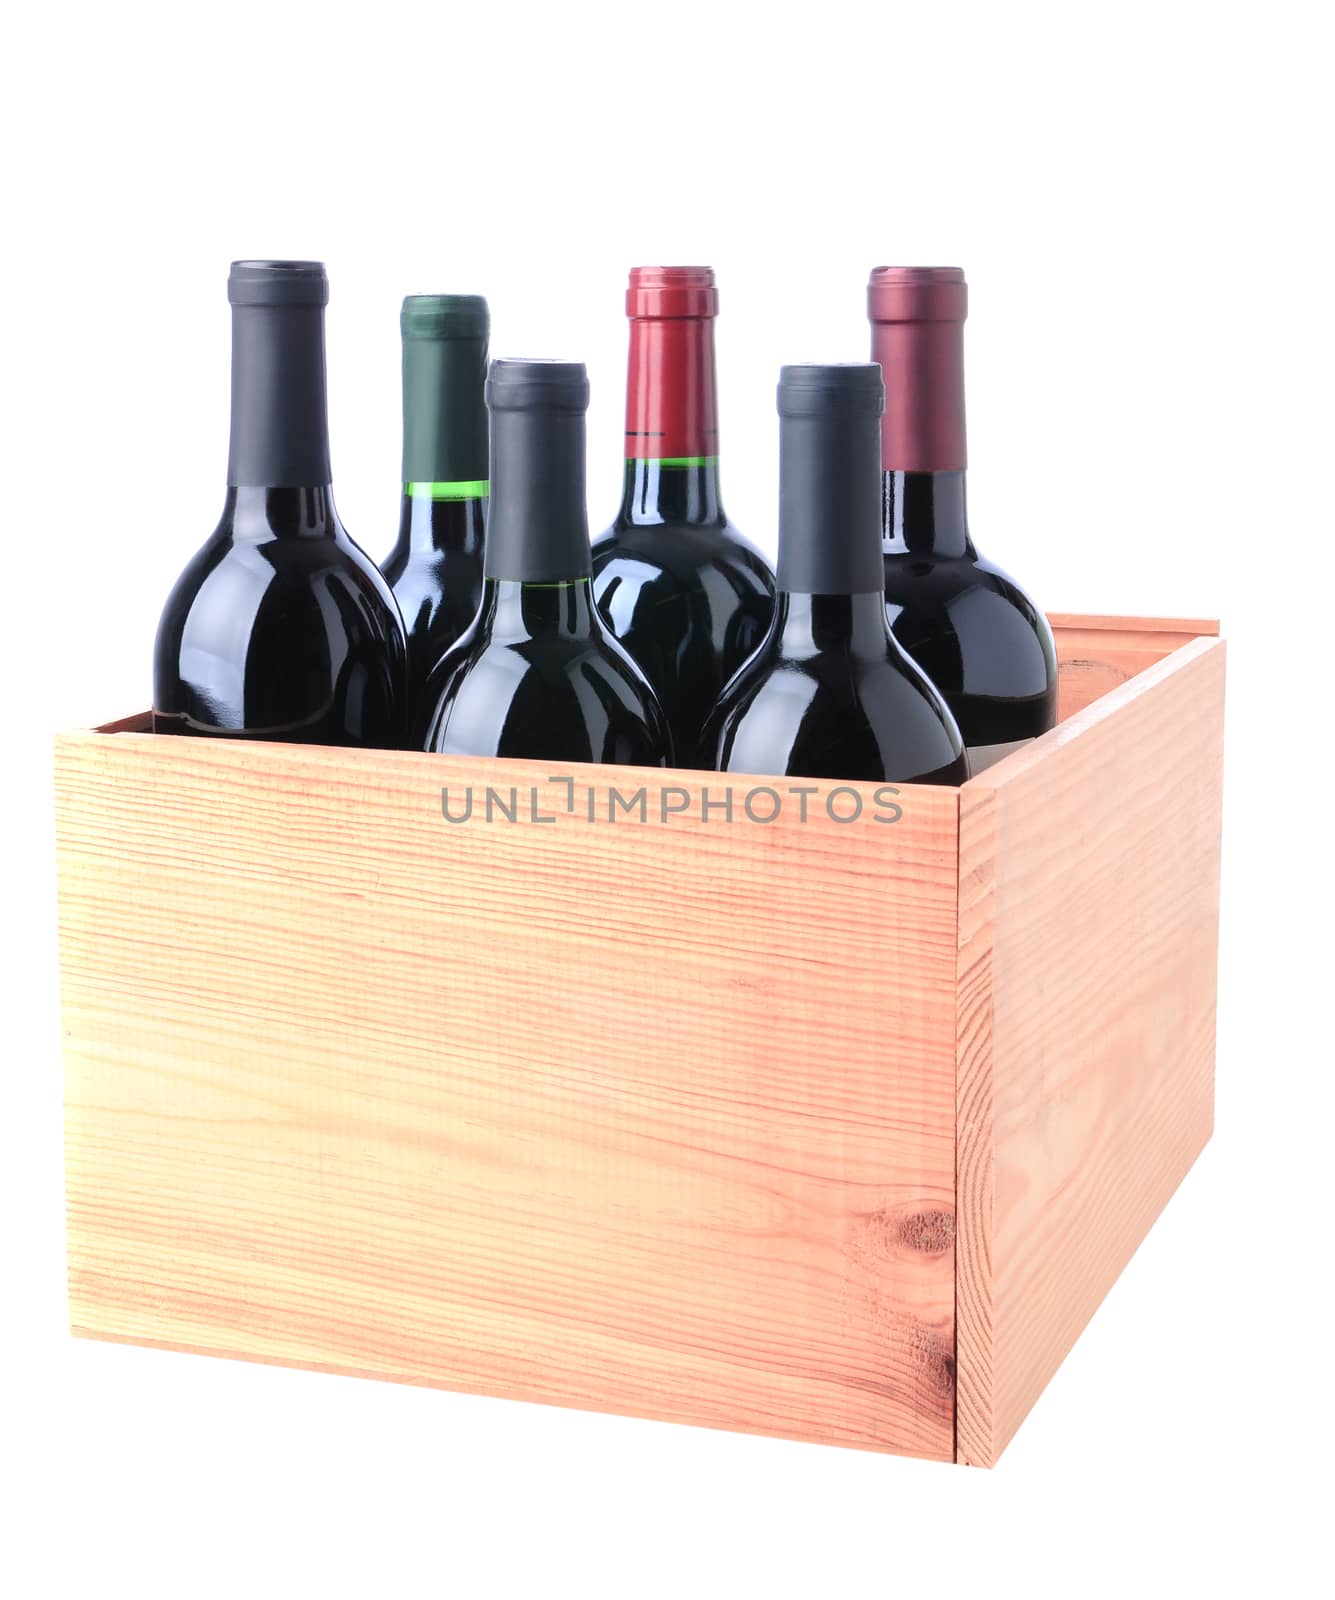 Red Wine Bottles in Wood Crate by sCukrov